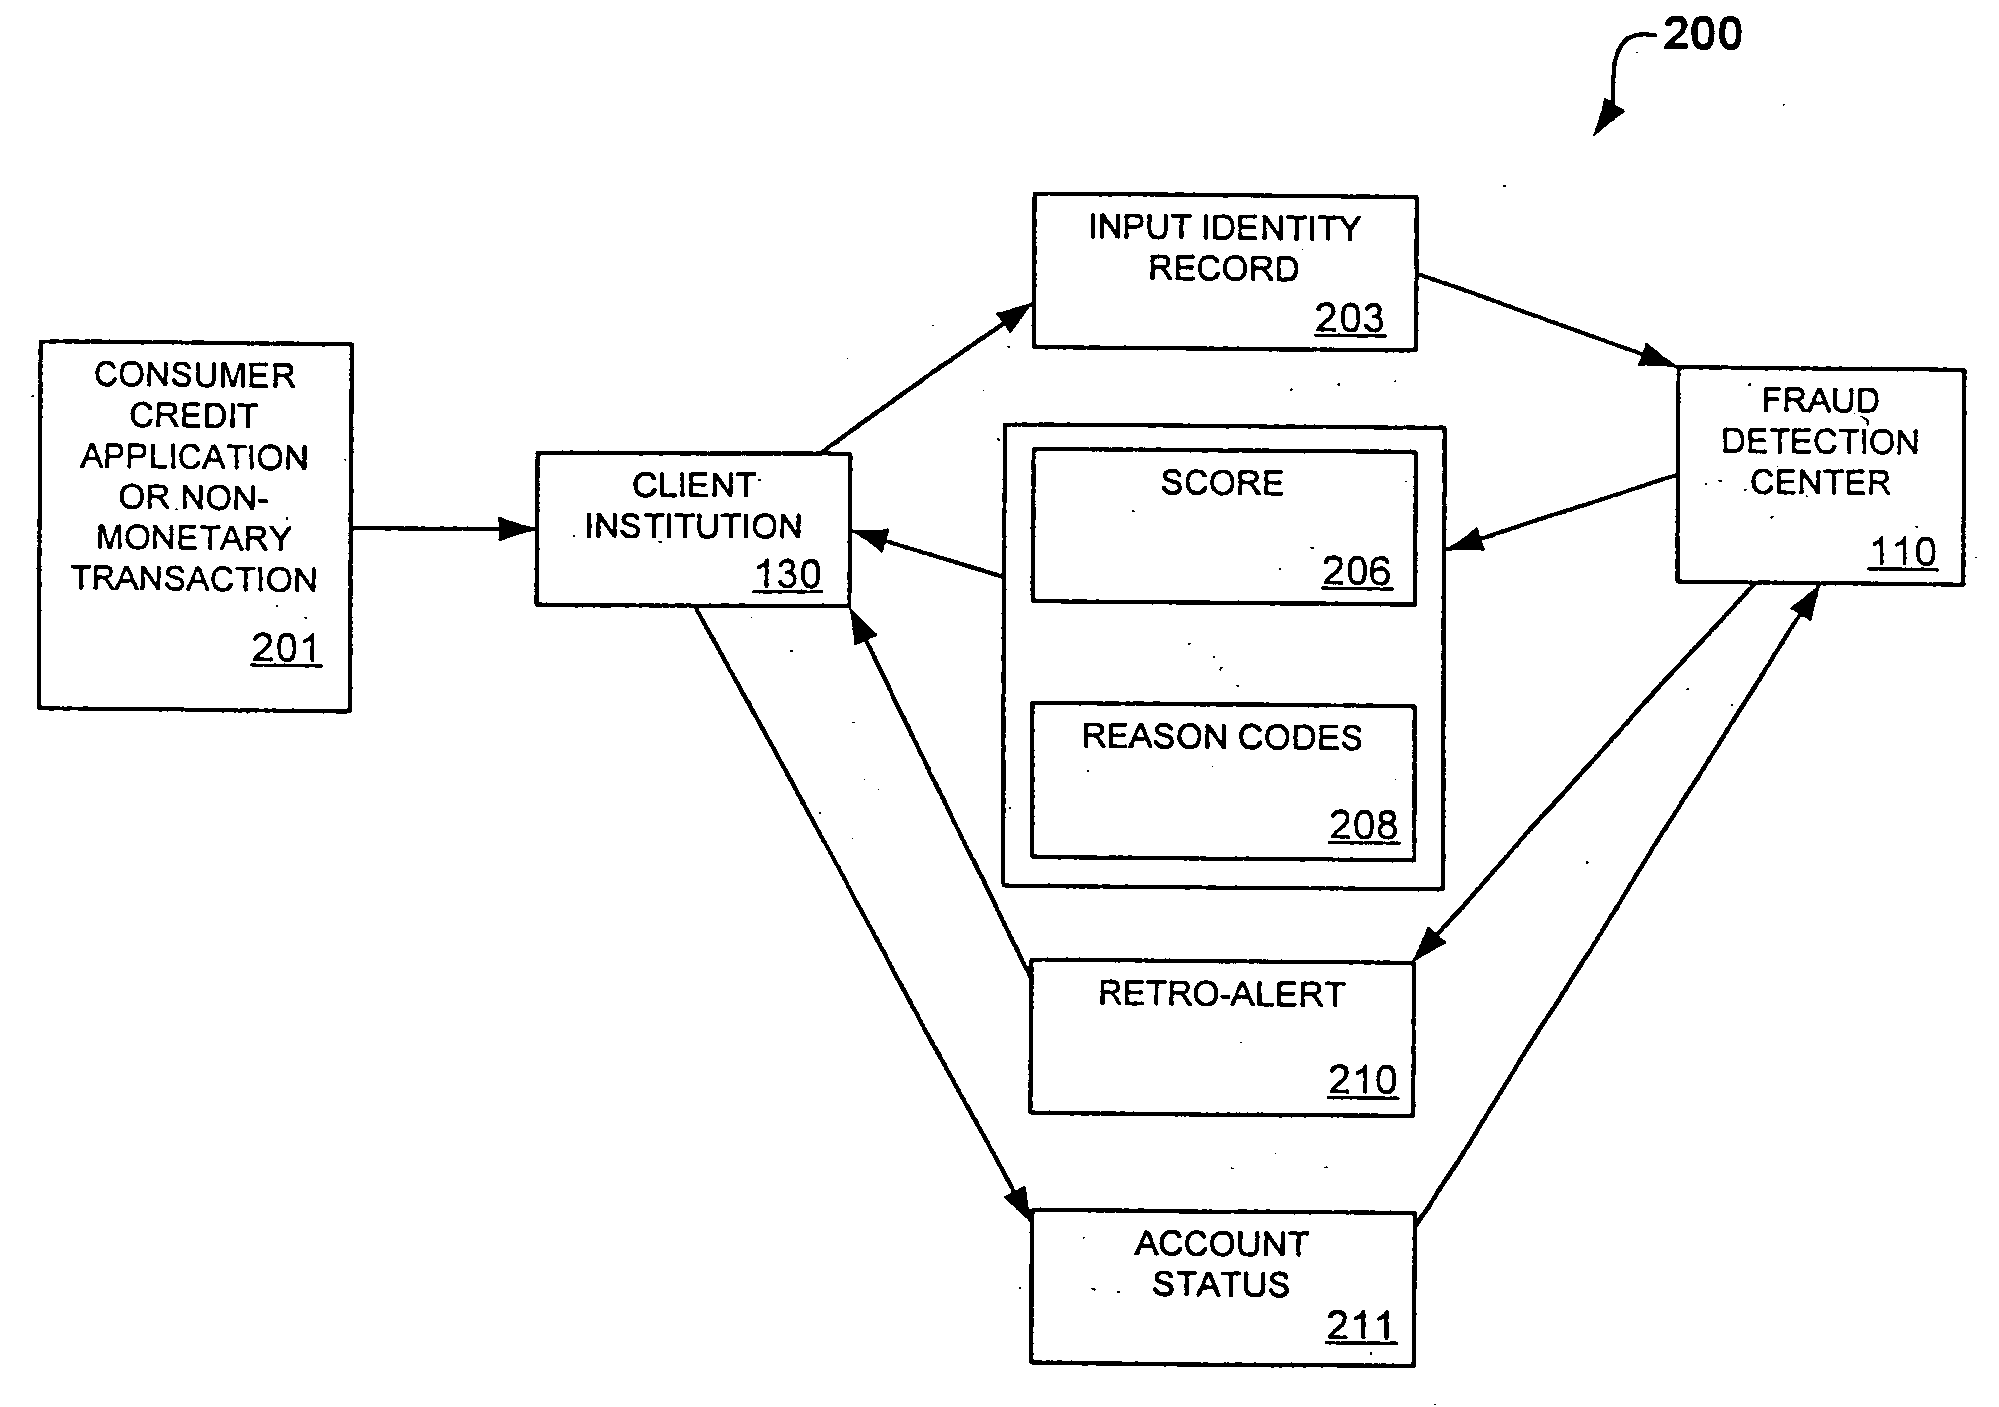 System and method for identity-based fraud detection for transactions using a plurality of historical identity records